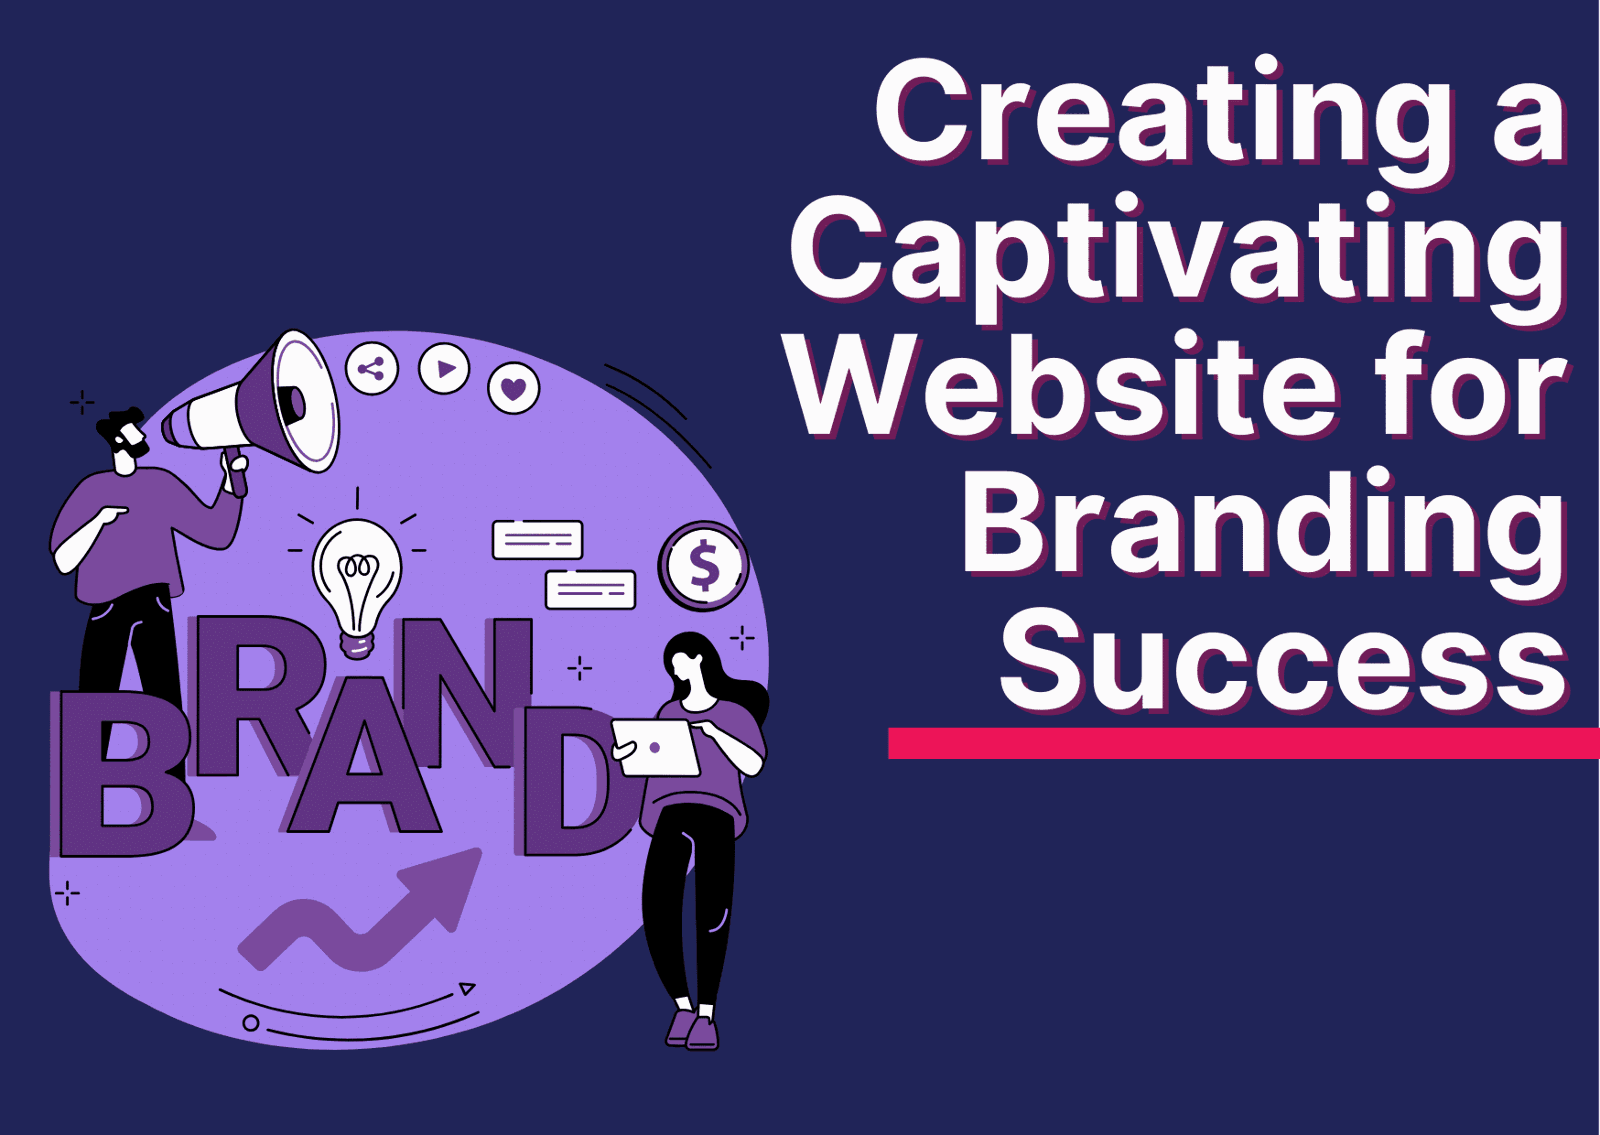 Creating a Captivating Website for Branding Success